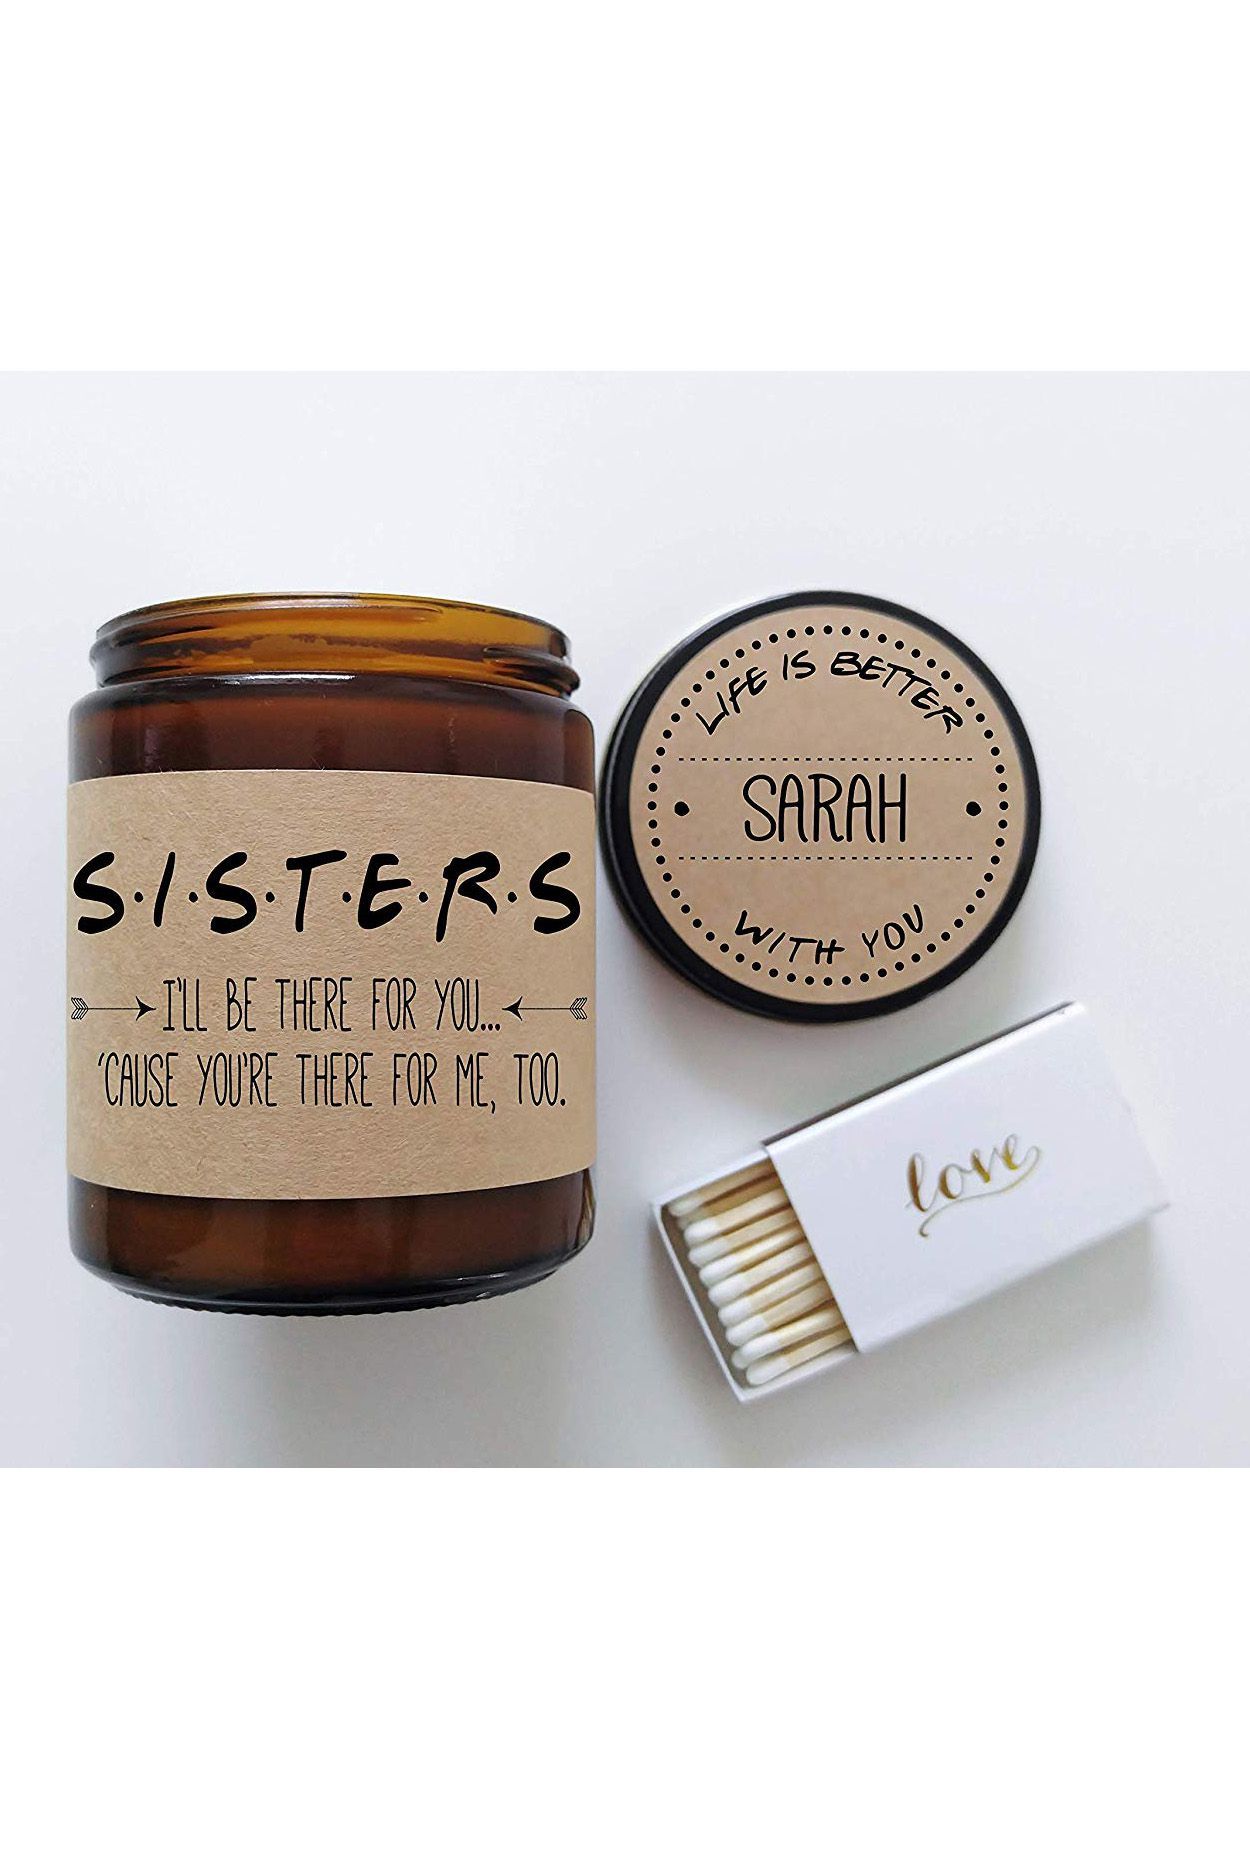 50 Christmas Gifts For Sisters For 2021 — Best Gift Ideas for Sisters